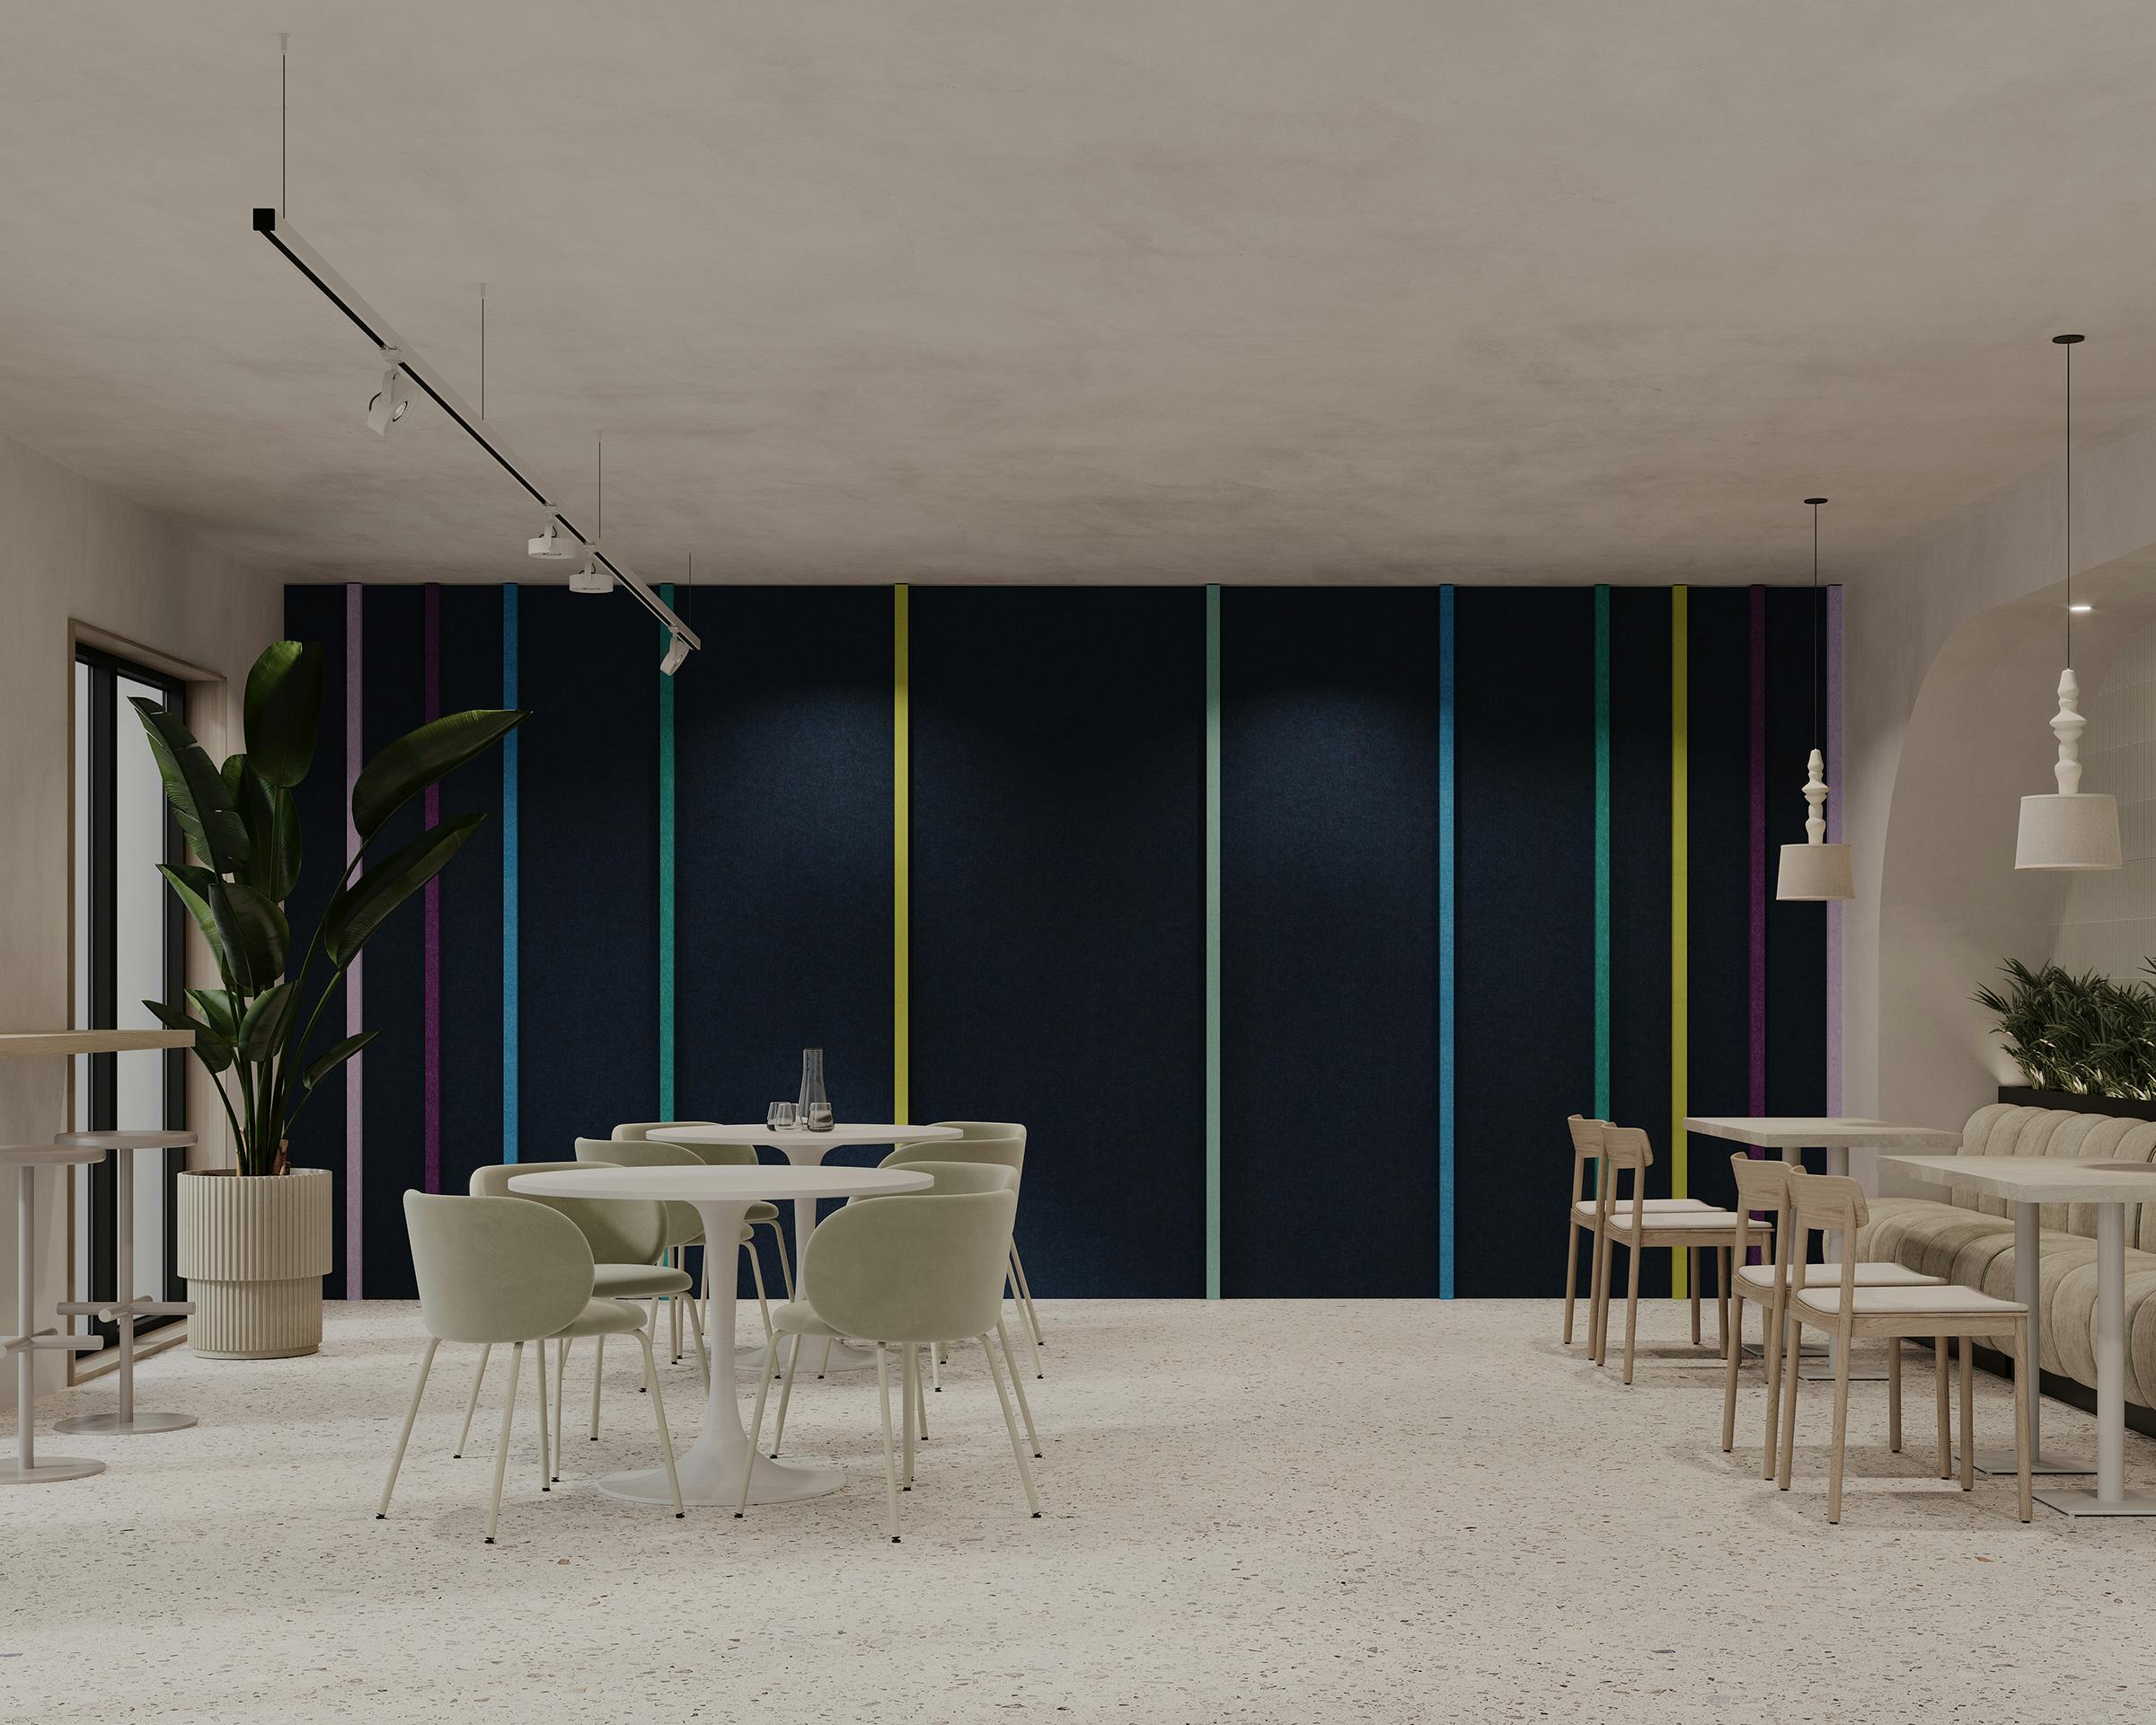 A modern, minimalist dining area with light-colored furniture, featuring a midnight blue acoustic felt wall accented with colorful vertical stripes. The seating includes green chairs around white tables, and beige chairs and a bench along the right wall. Potted plants add greenery.